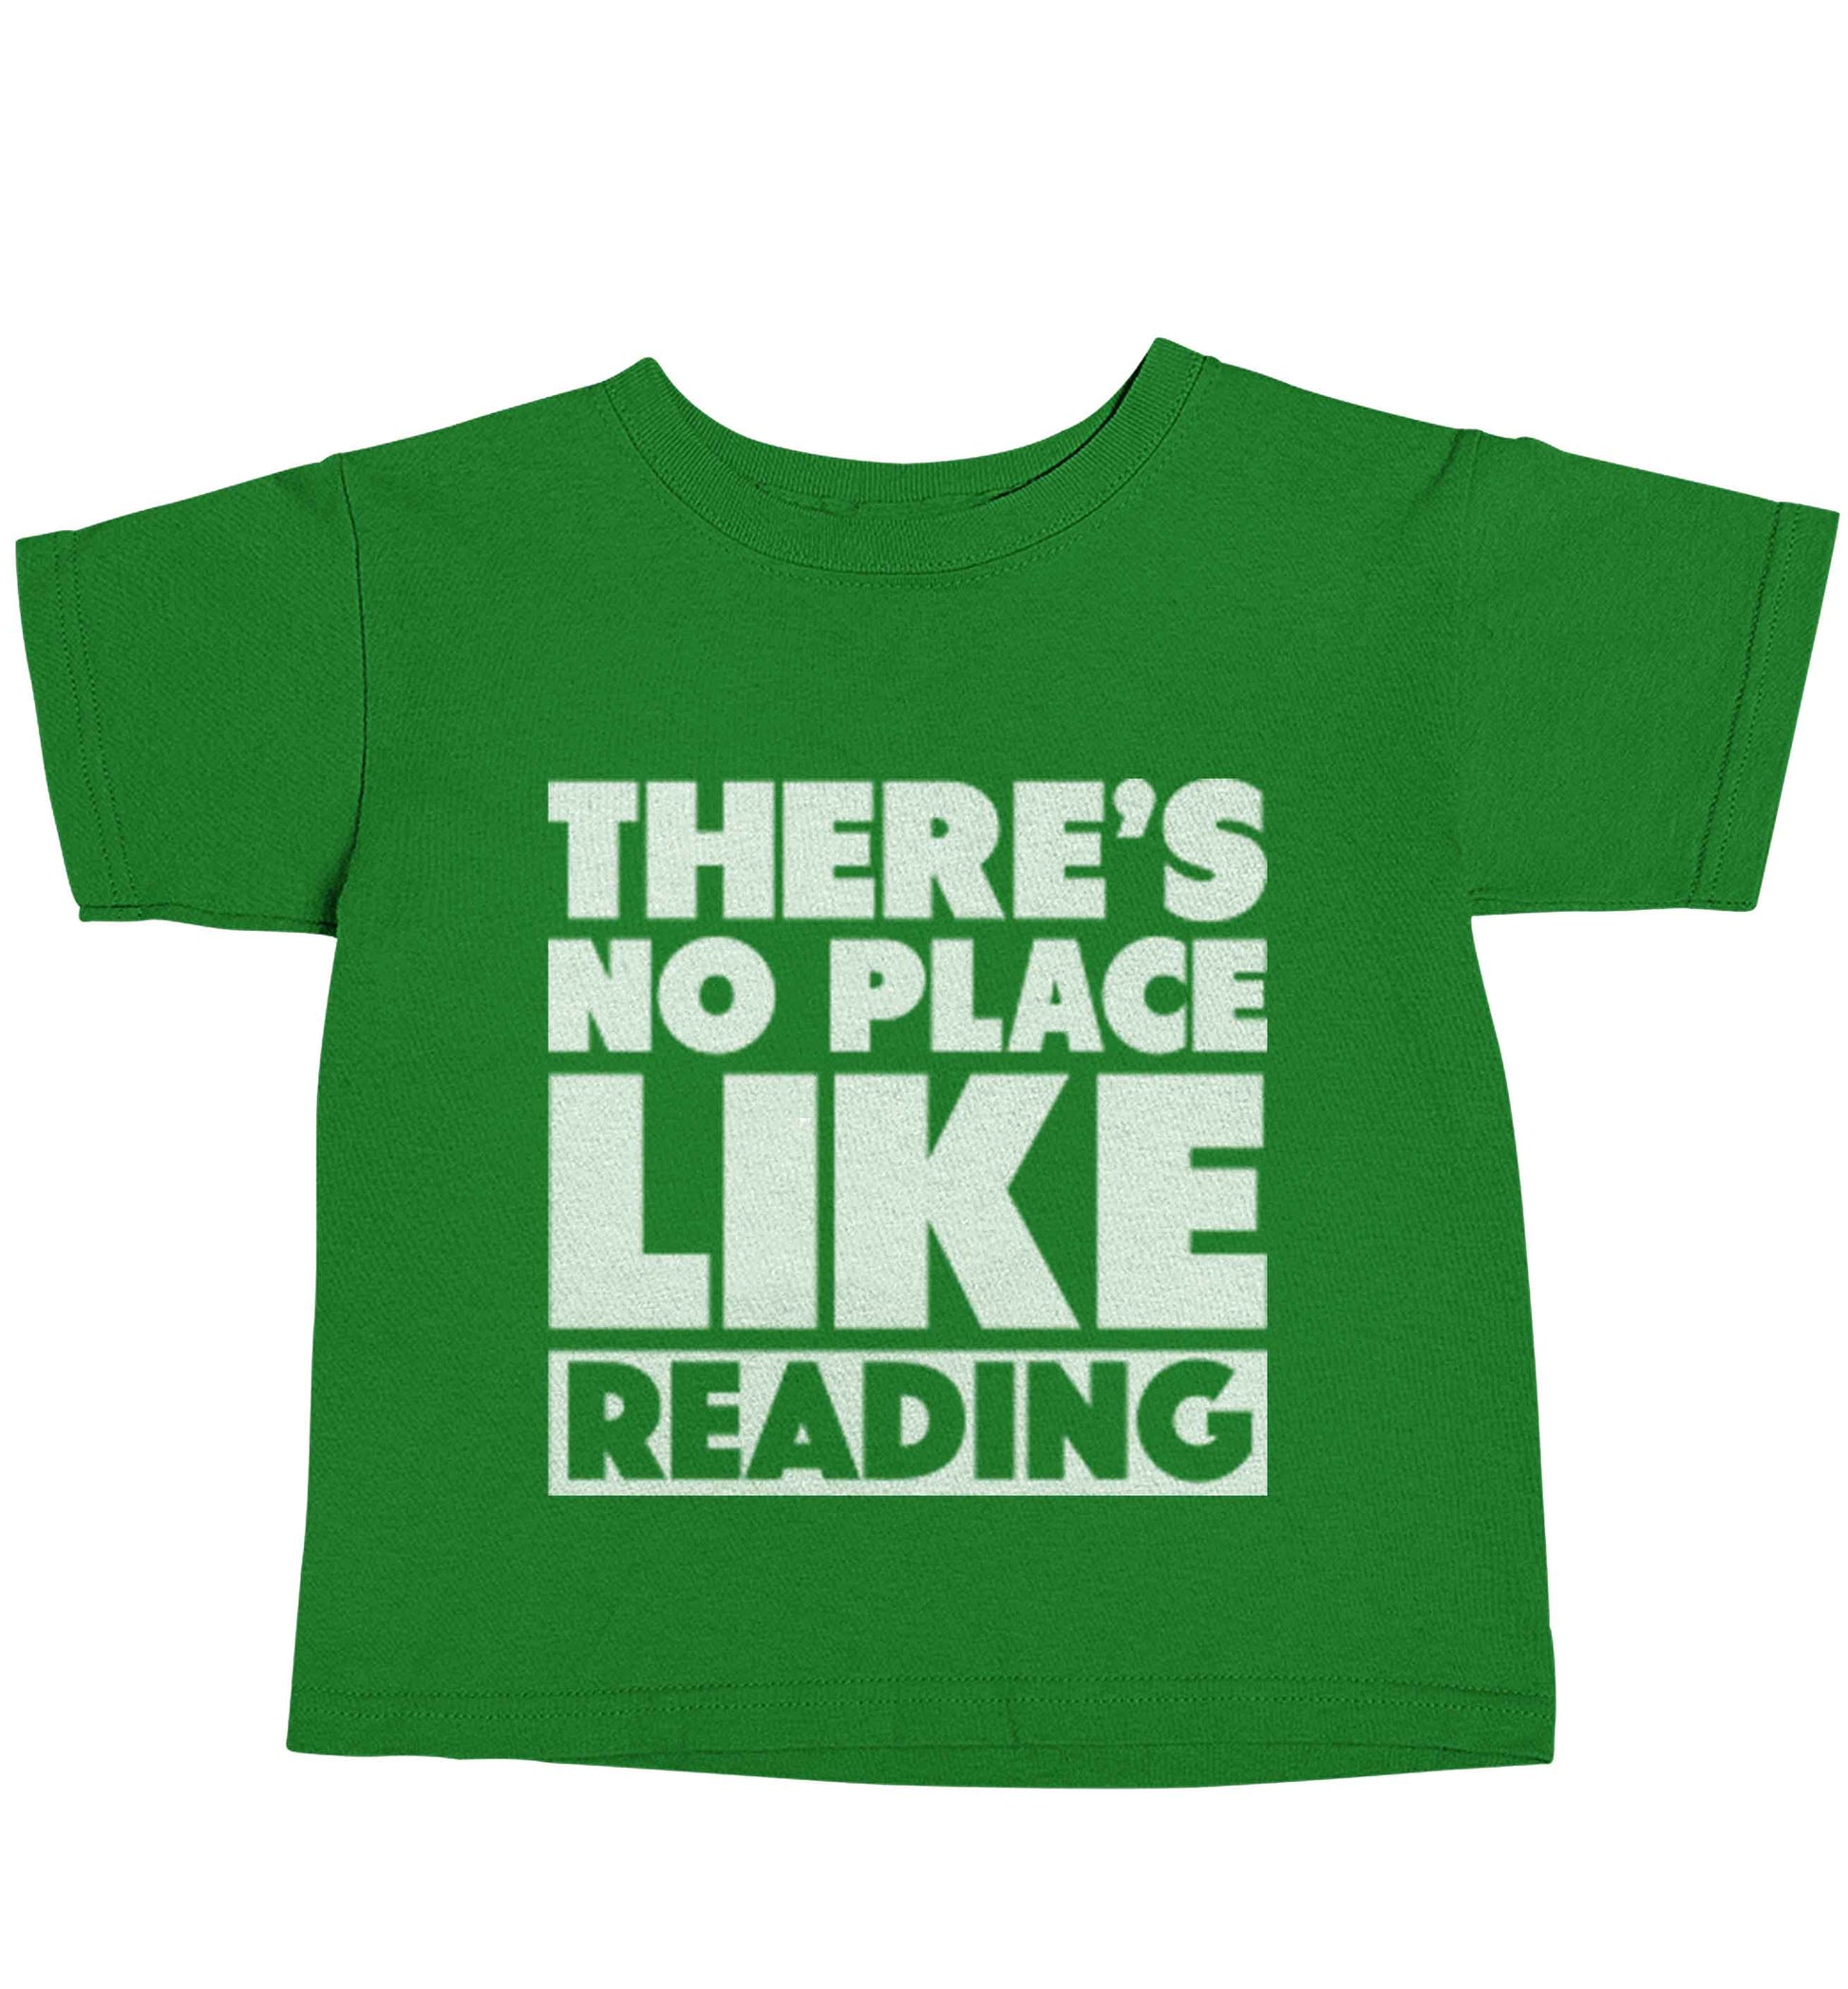 There's no place like Readinggreen baby toddler Tshirt 2 Years